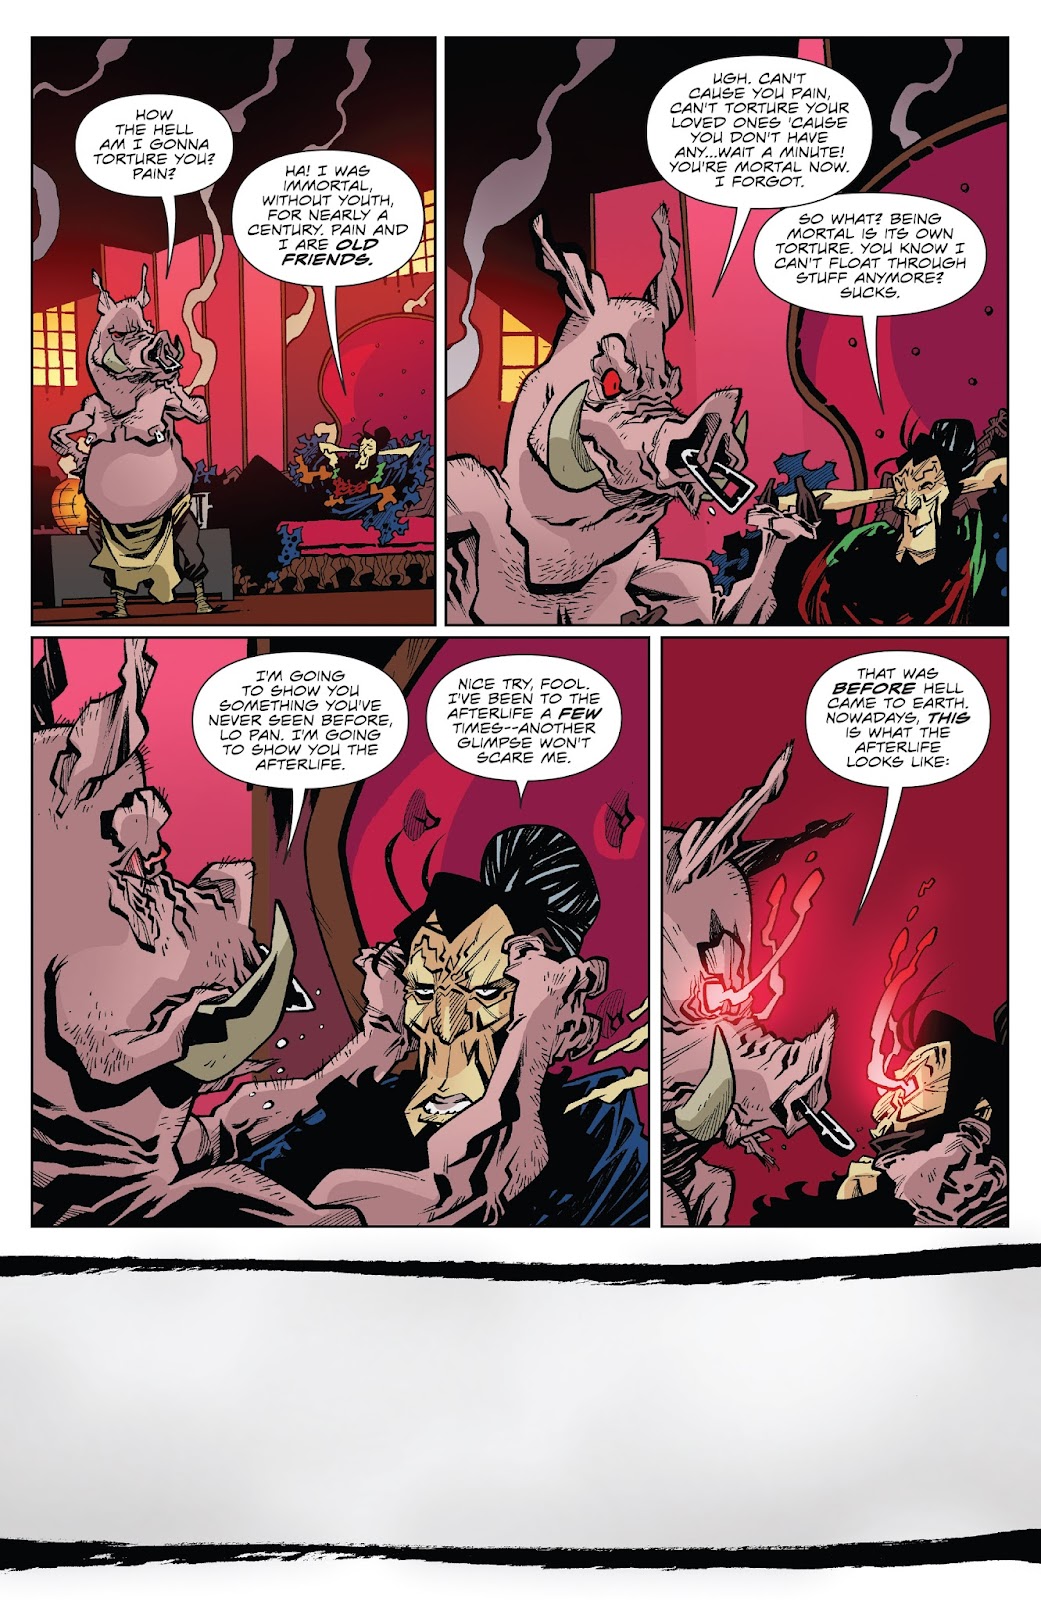 Big Trouble in Little China: Old Man Jack issue 6 - Page 6